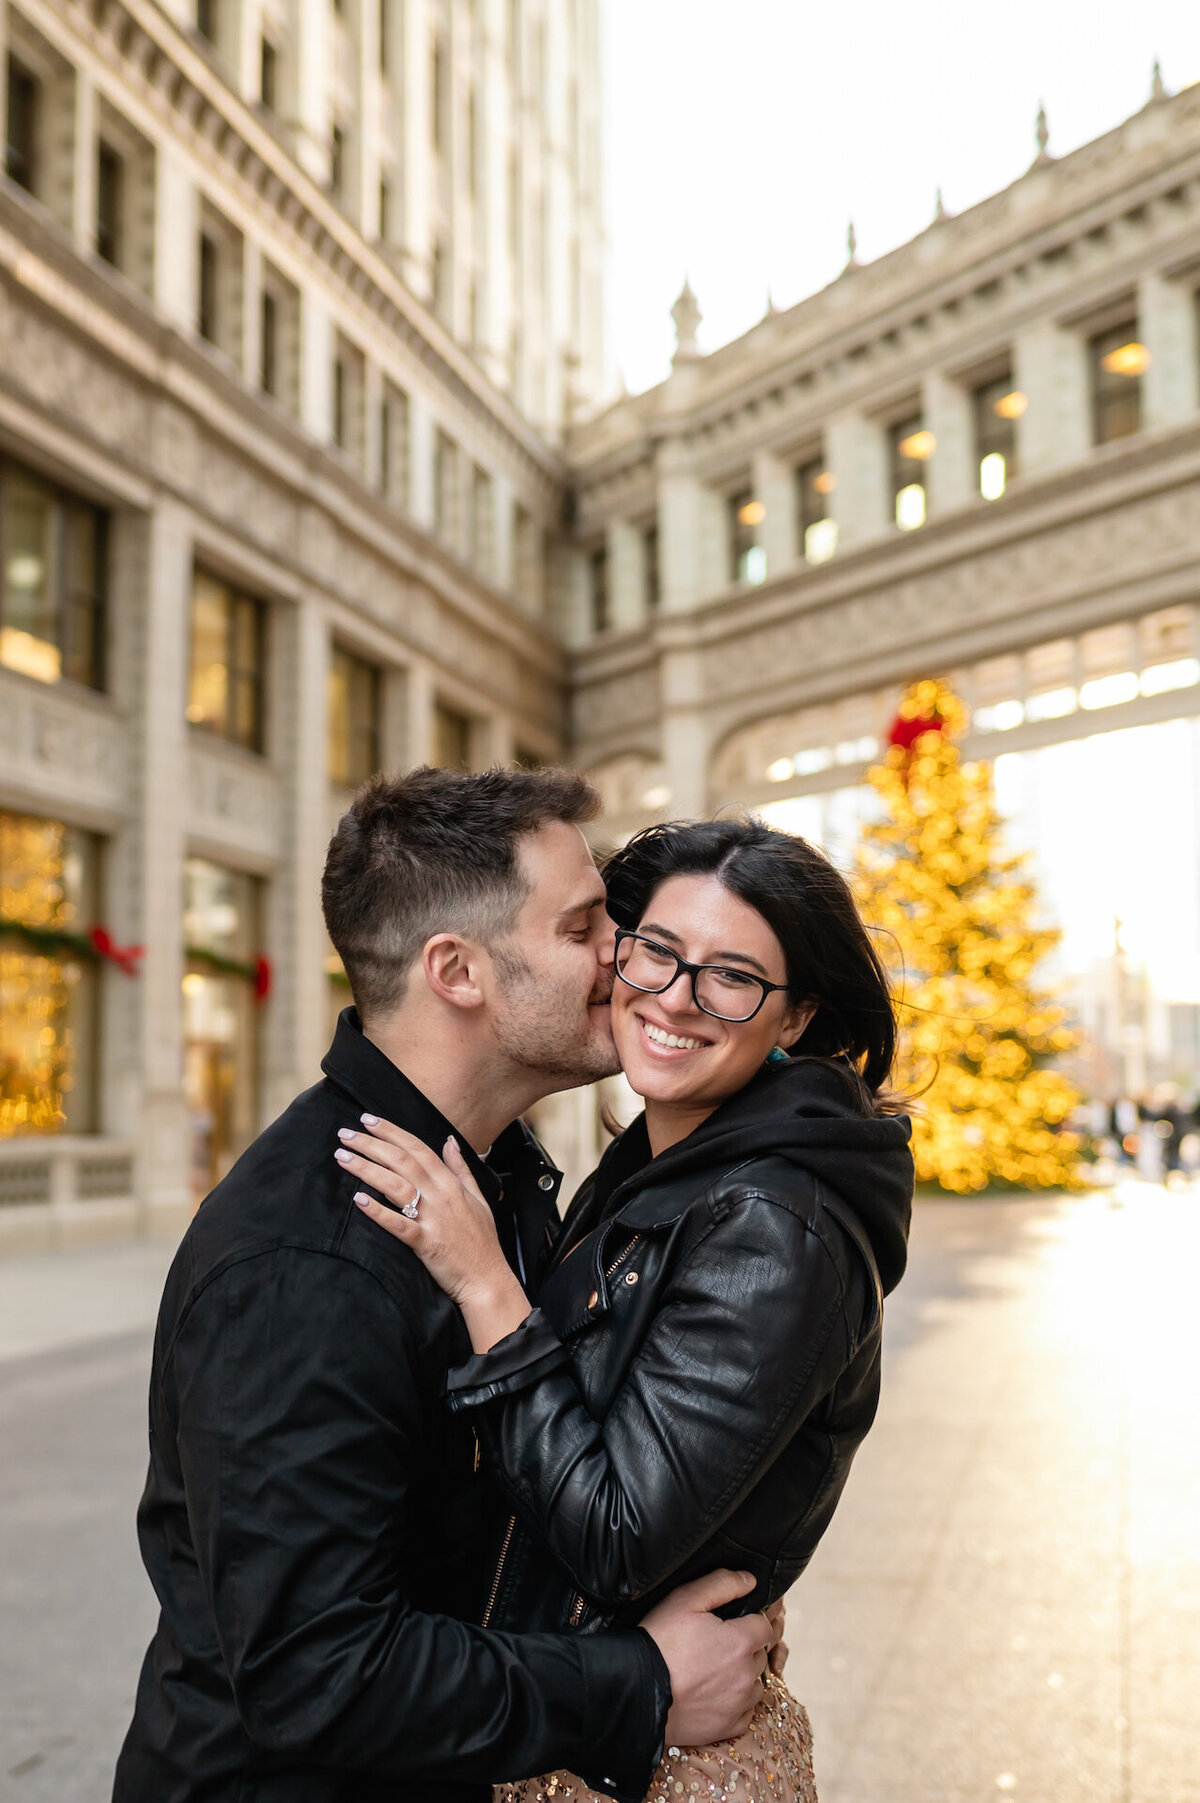 A man kisses a women during Christmas time at the Wrigley Building in Chicago